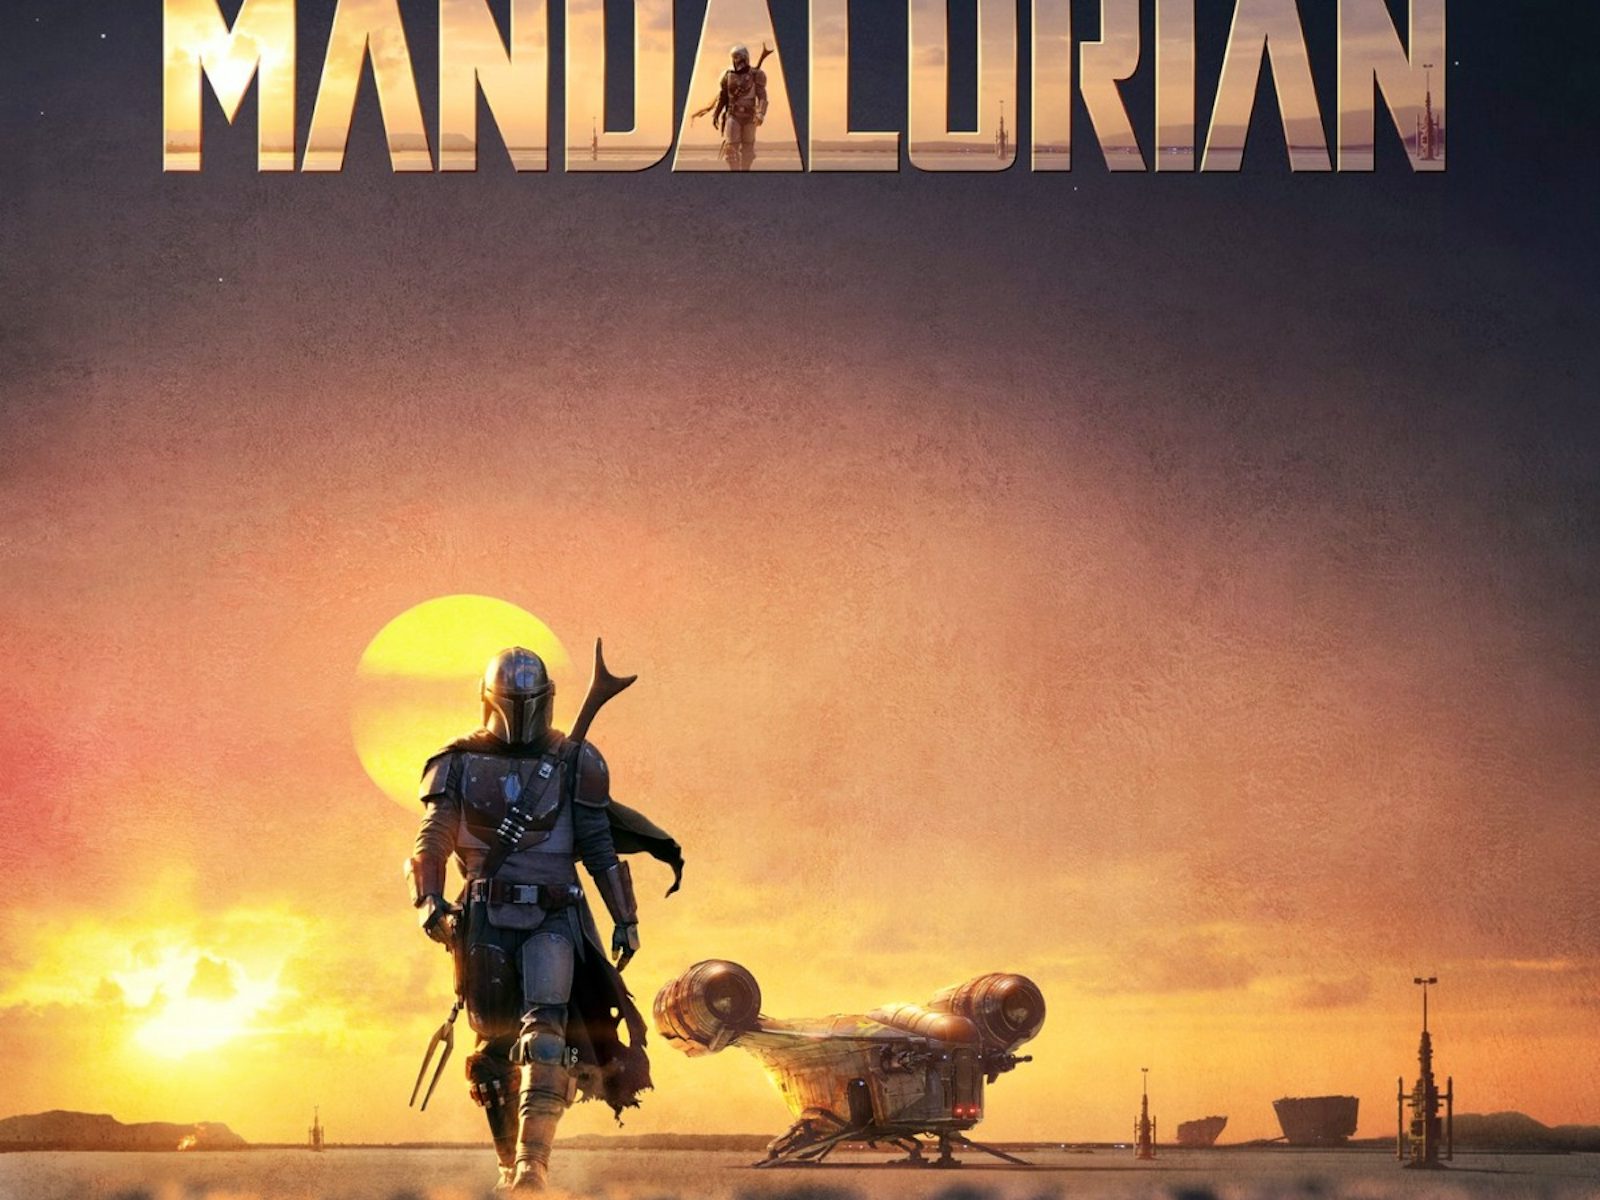 'Star Wars: The Mandalorian' live-action TV series releases first